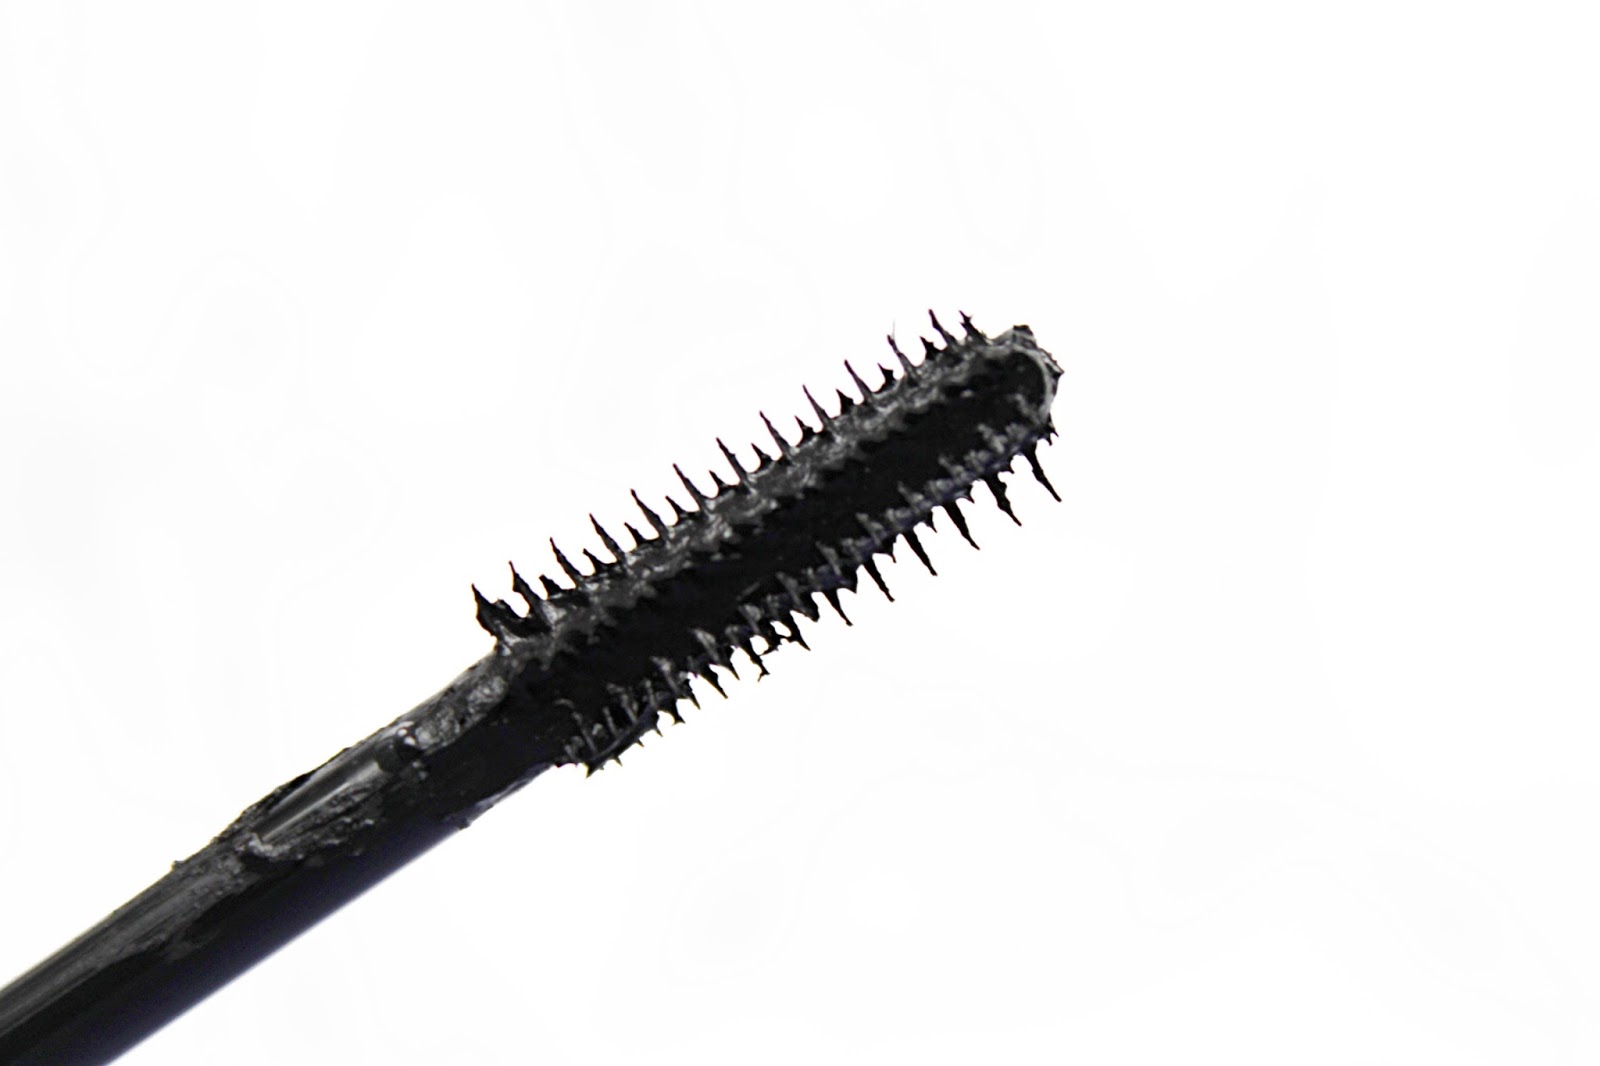 Urban Decay Troublemaker Mascara Review 